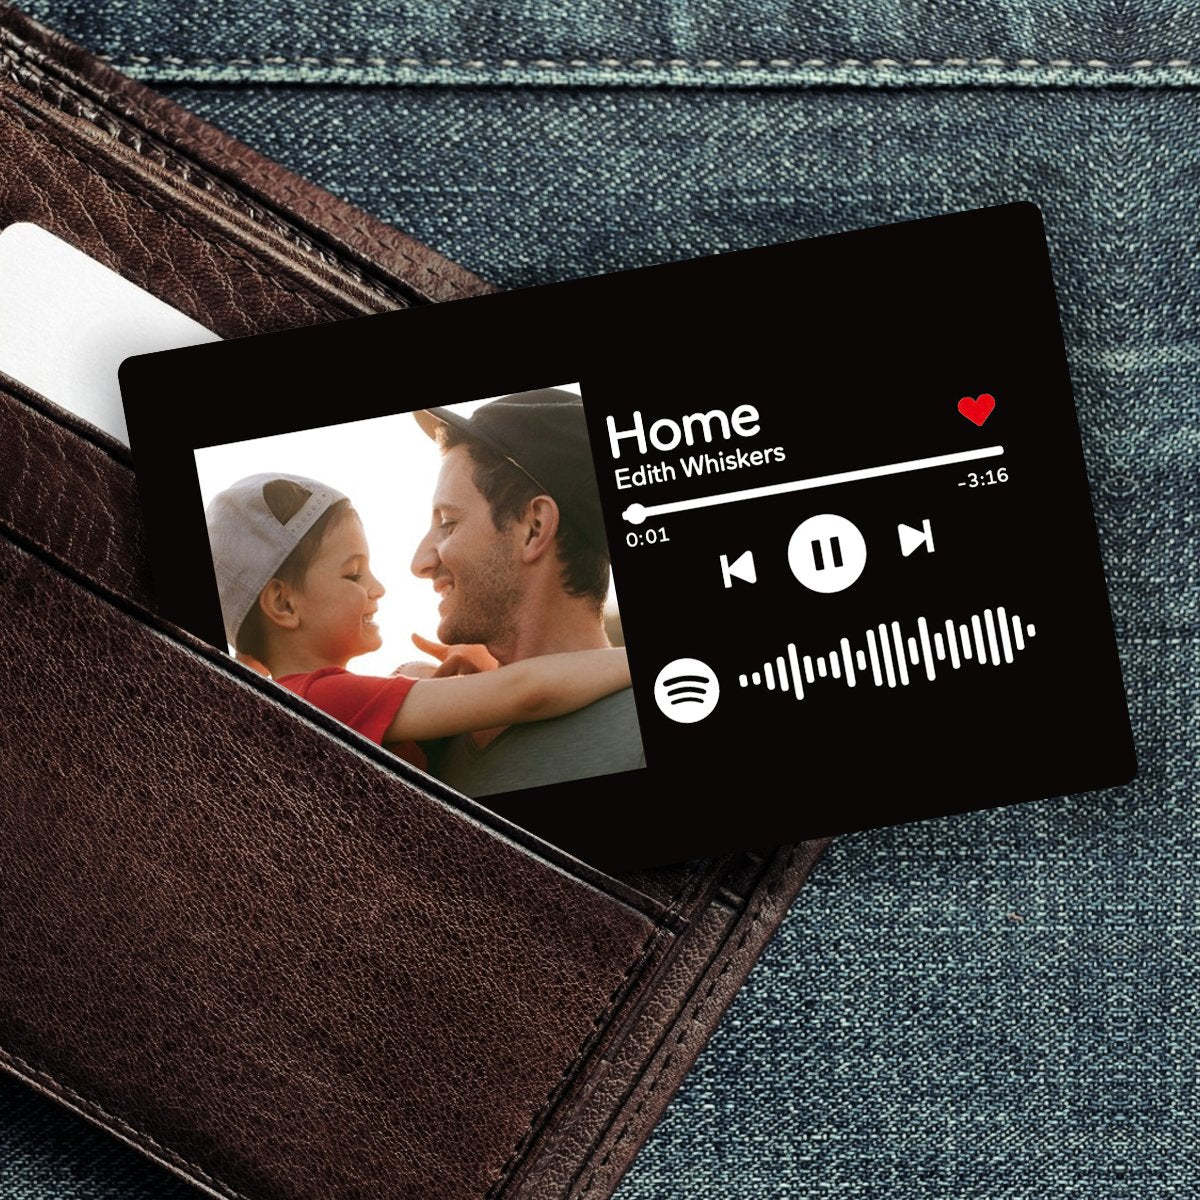 Scannable Spotify Code Photo Wallet Insert Card Gifts Black - 